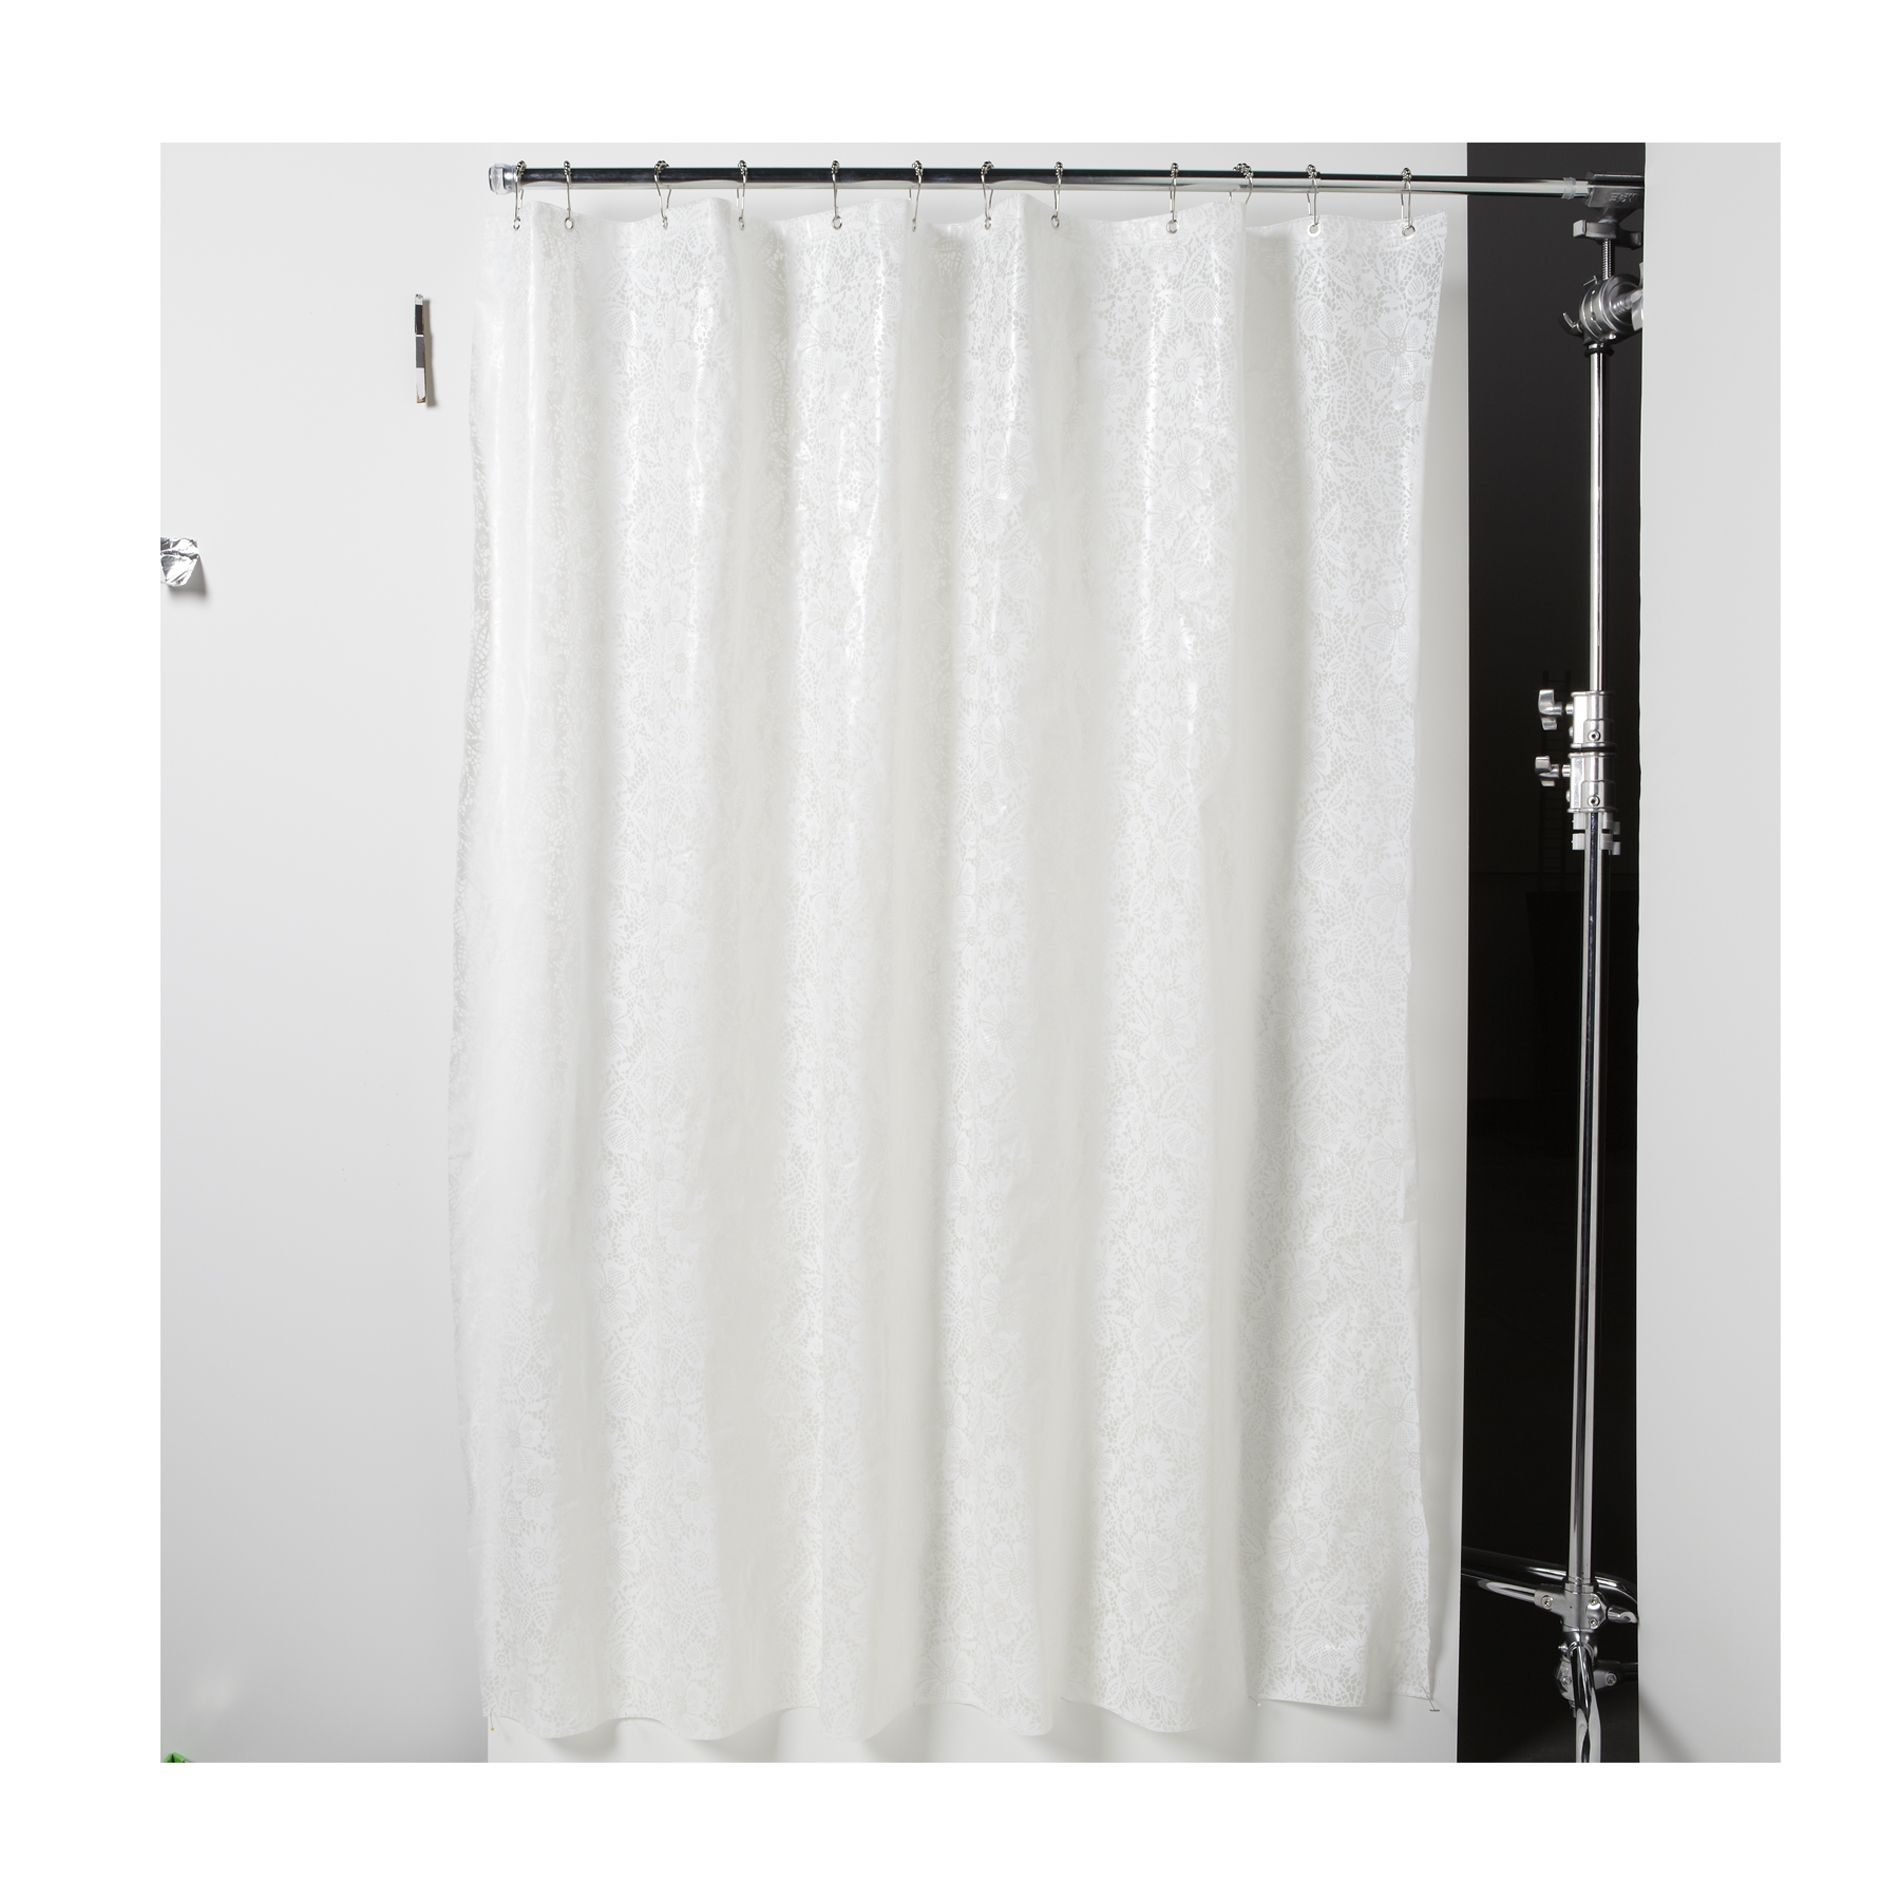 H20 Printed Lace Shower Curtain